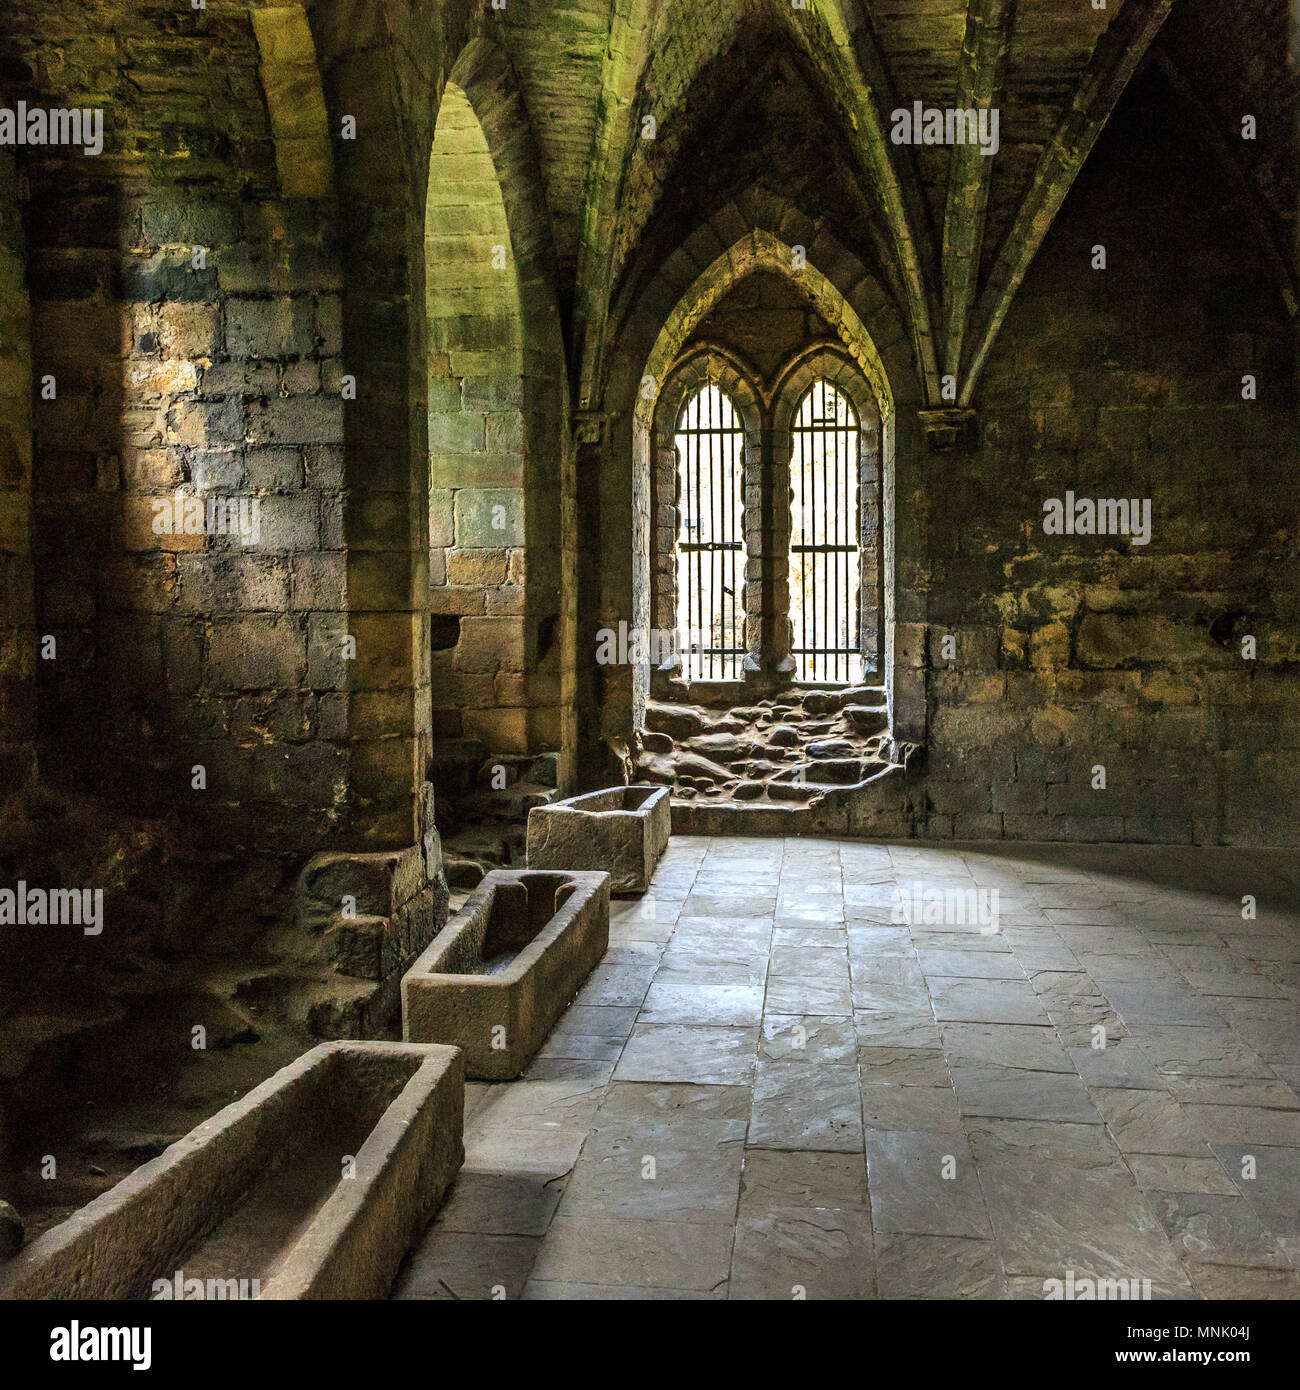 England, West Yorkshire, Leeds, North Bank of river Aire. Kirkstall Abbey, 12th century Cistercian Monastery ruins. Stock Photo